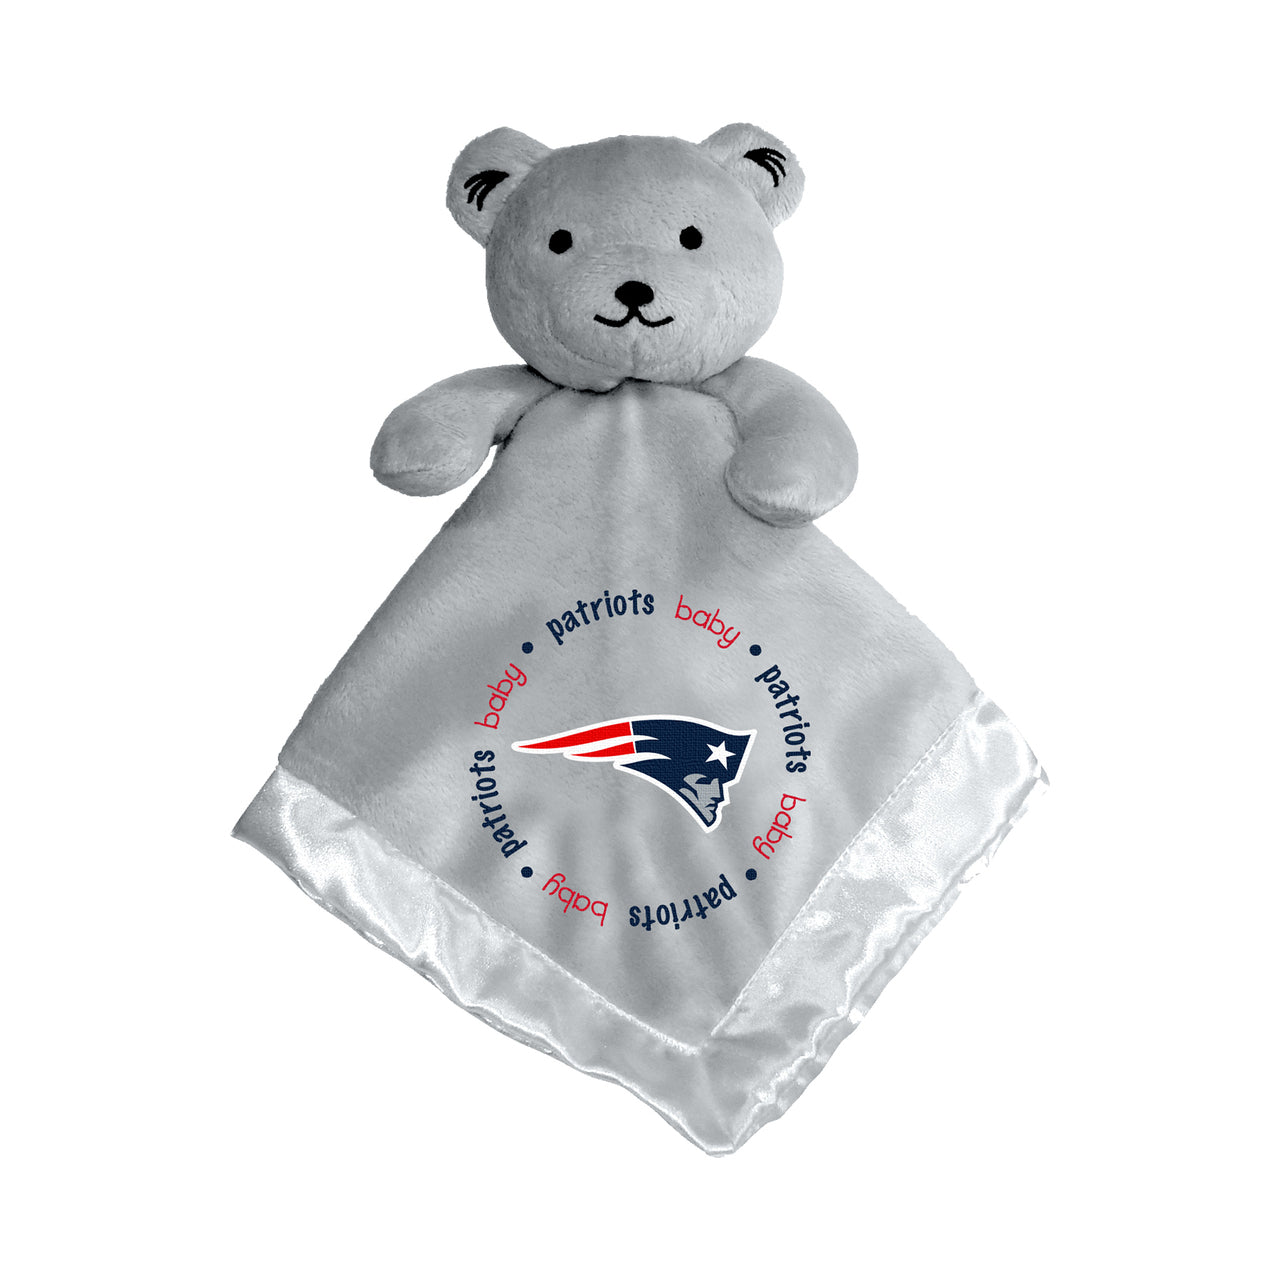 New England Patriots Gray Embroidered Security Bear by Masterpieces Inc.